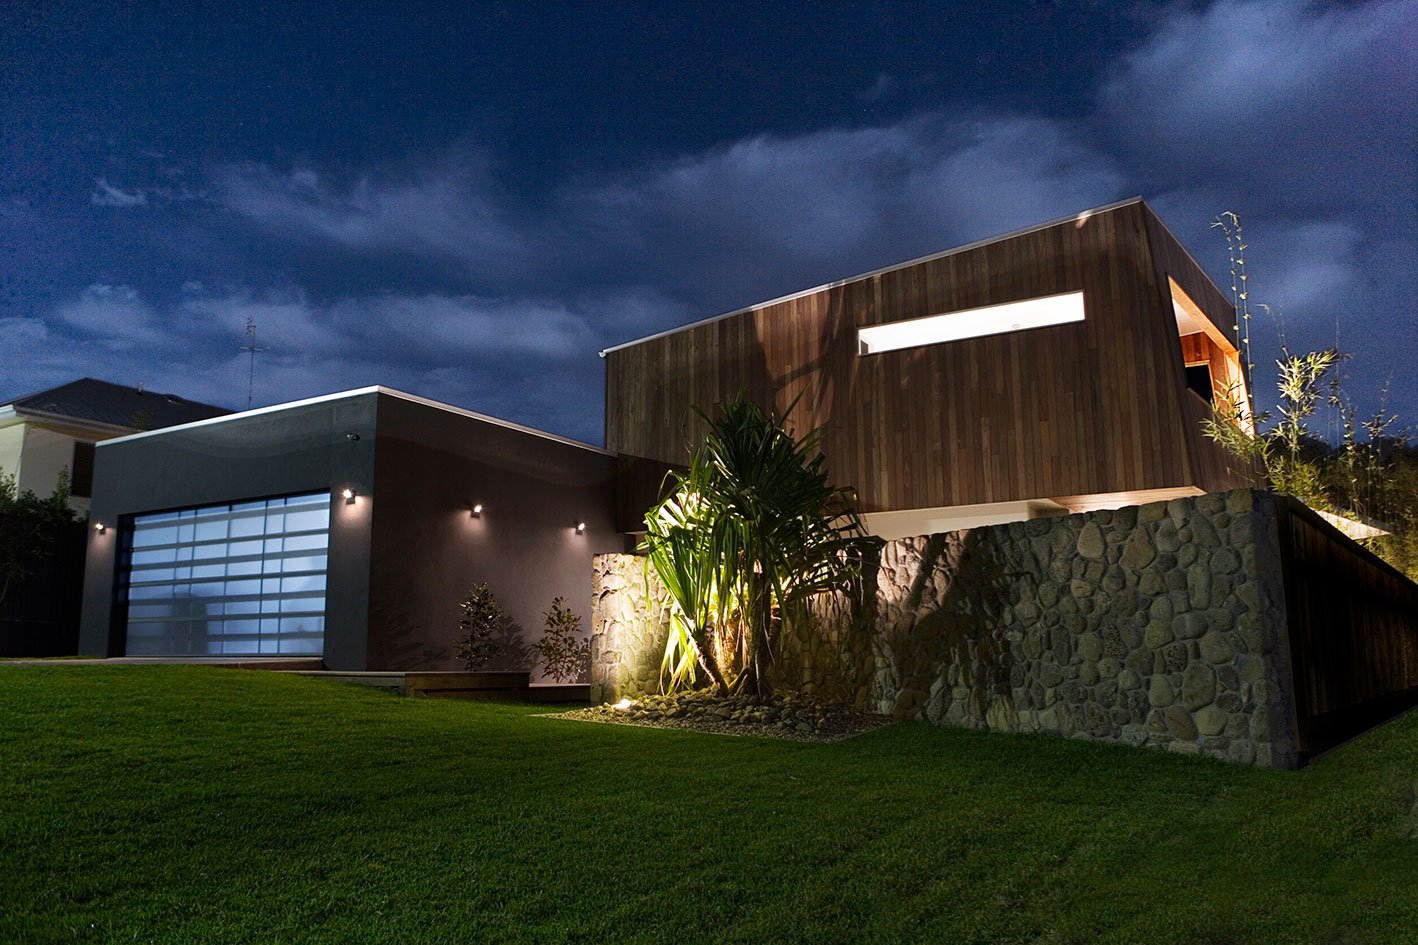 Compass-Place project by mdesign, a building design practice that operates on the Sunshine Coast.